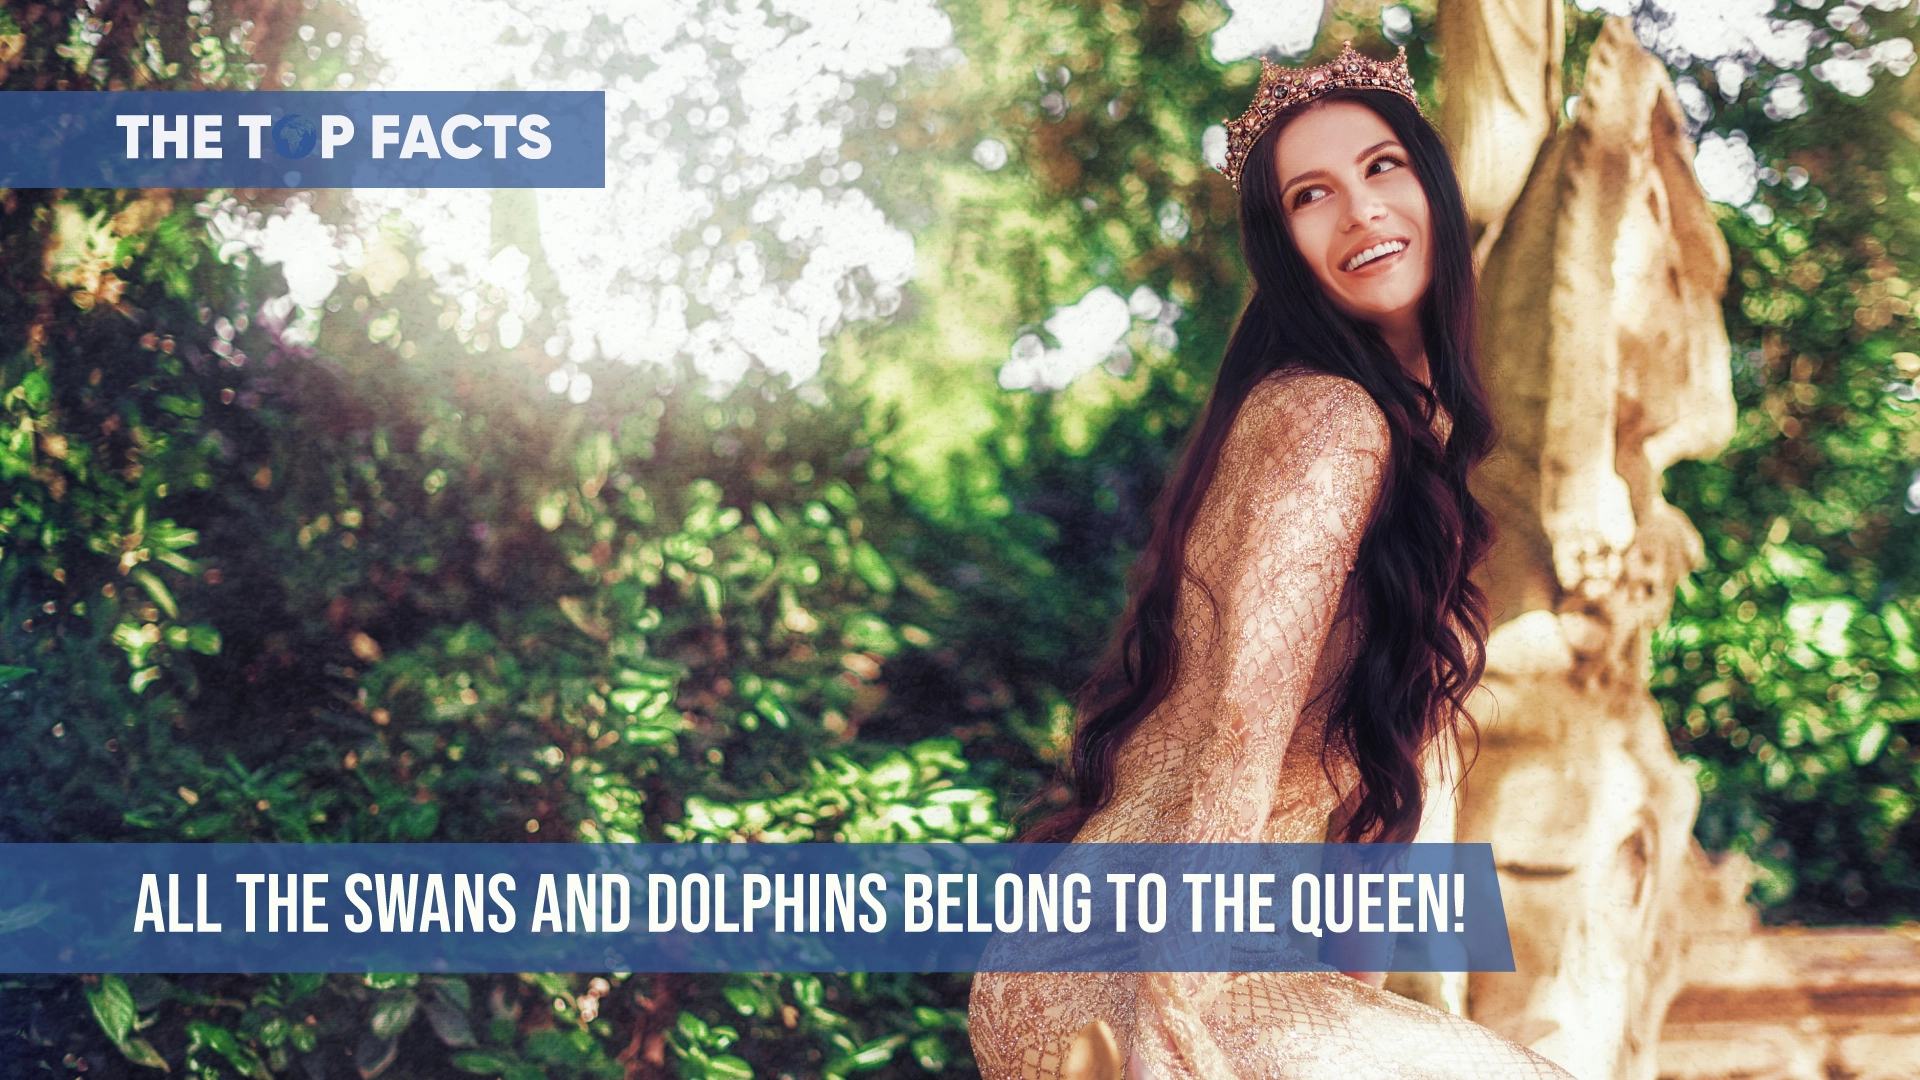 All the swans and dolphins belong to the Queen!